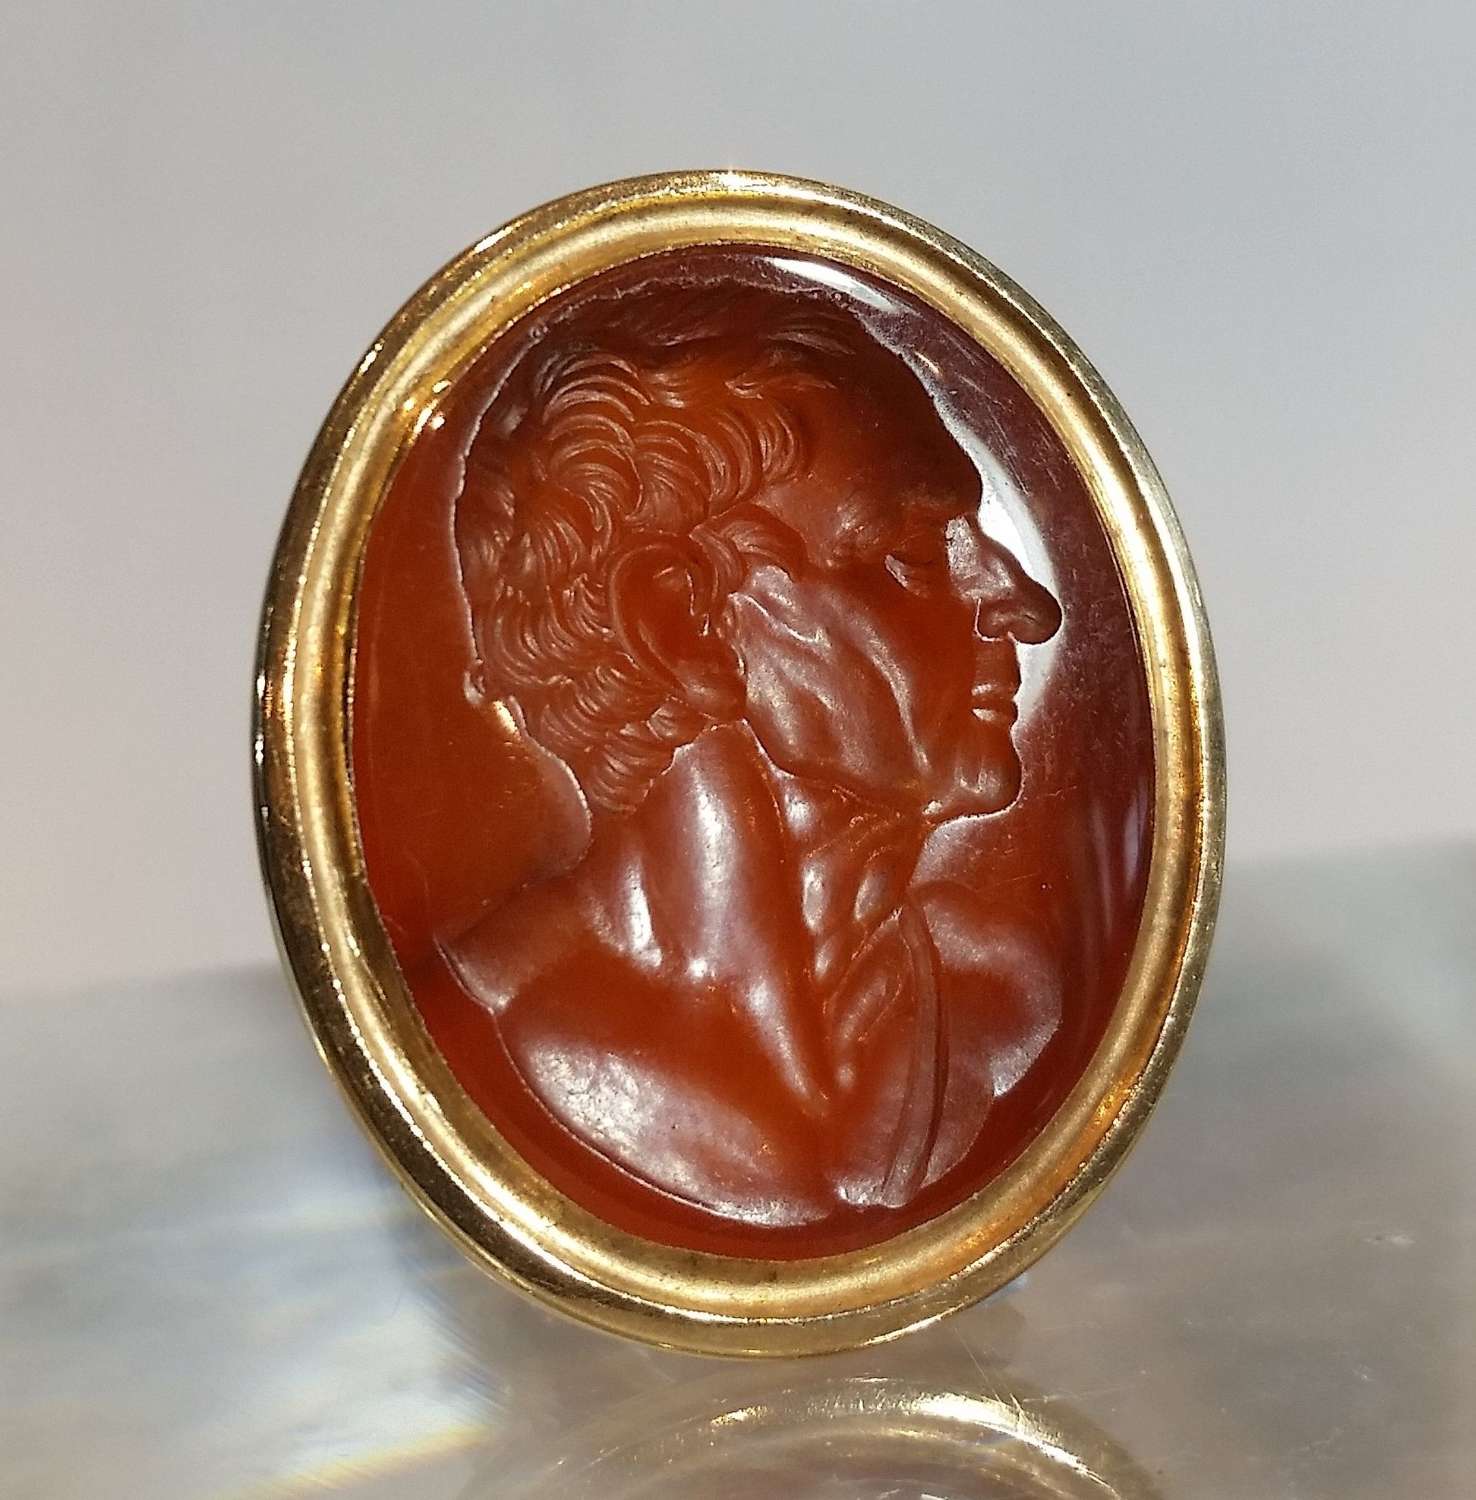 Intaglio of Demosthenes attributed to Burch